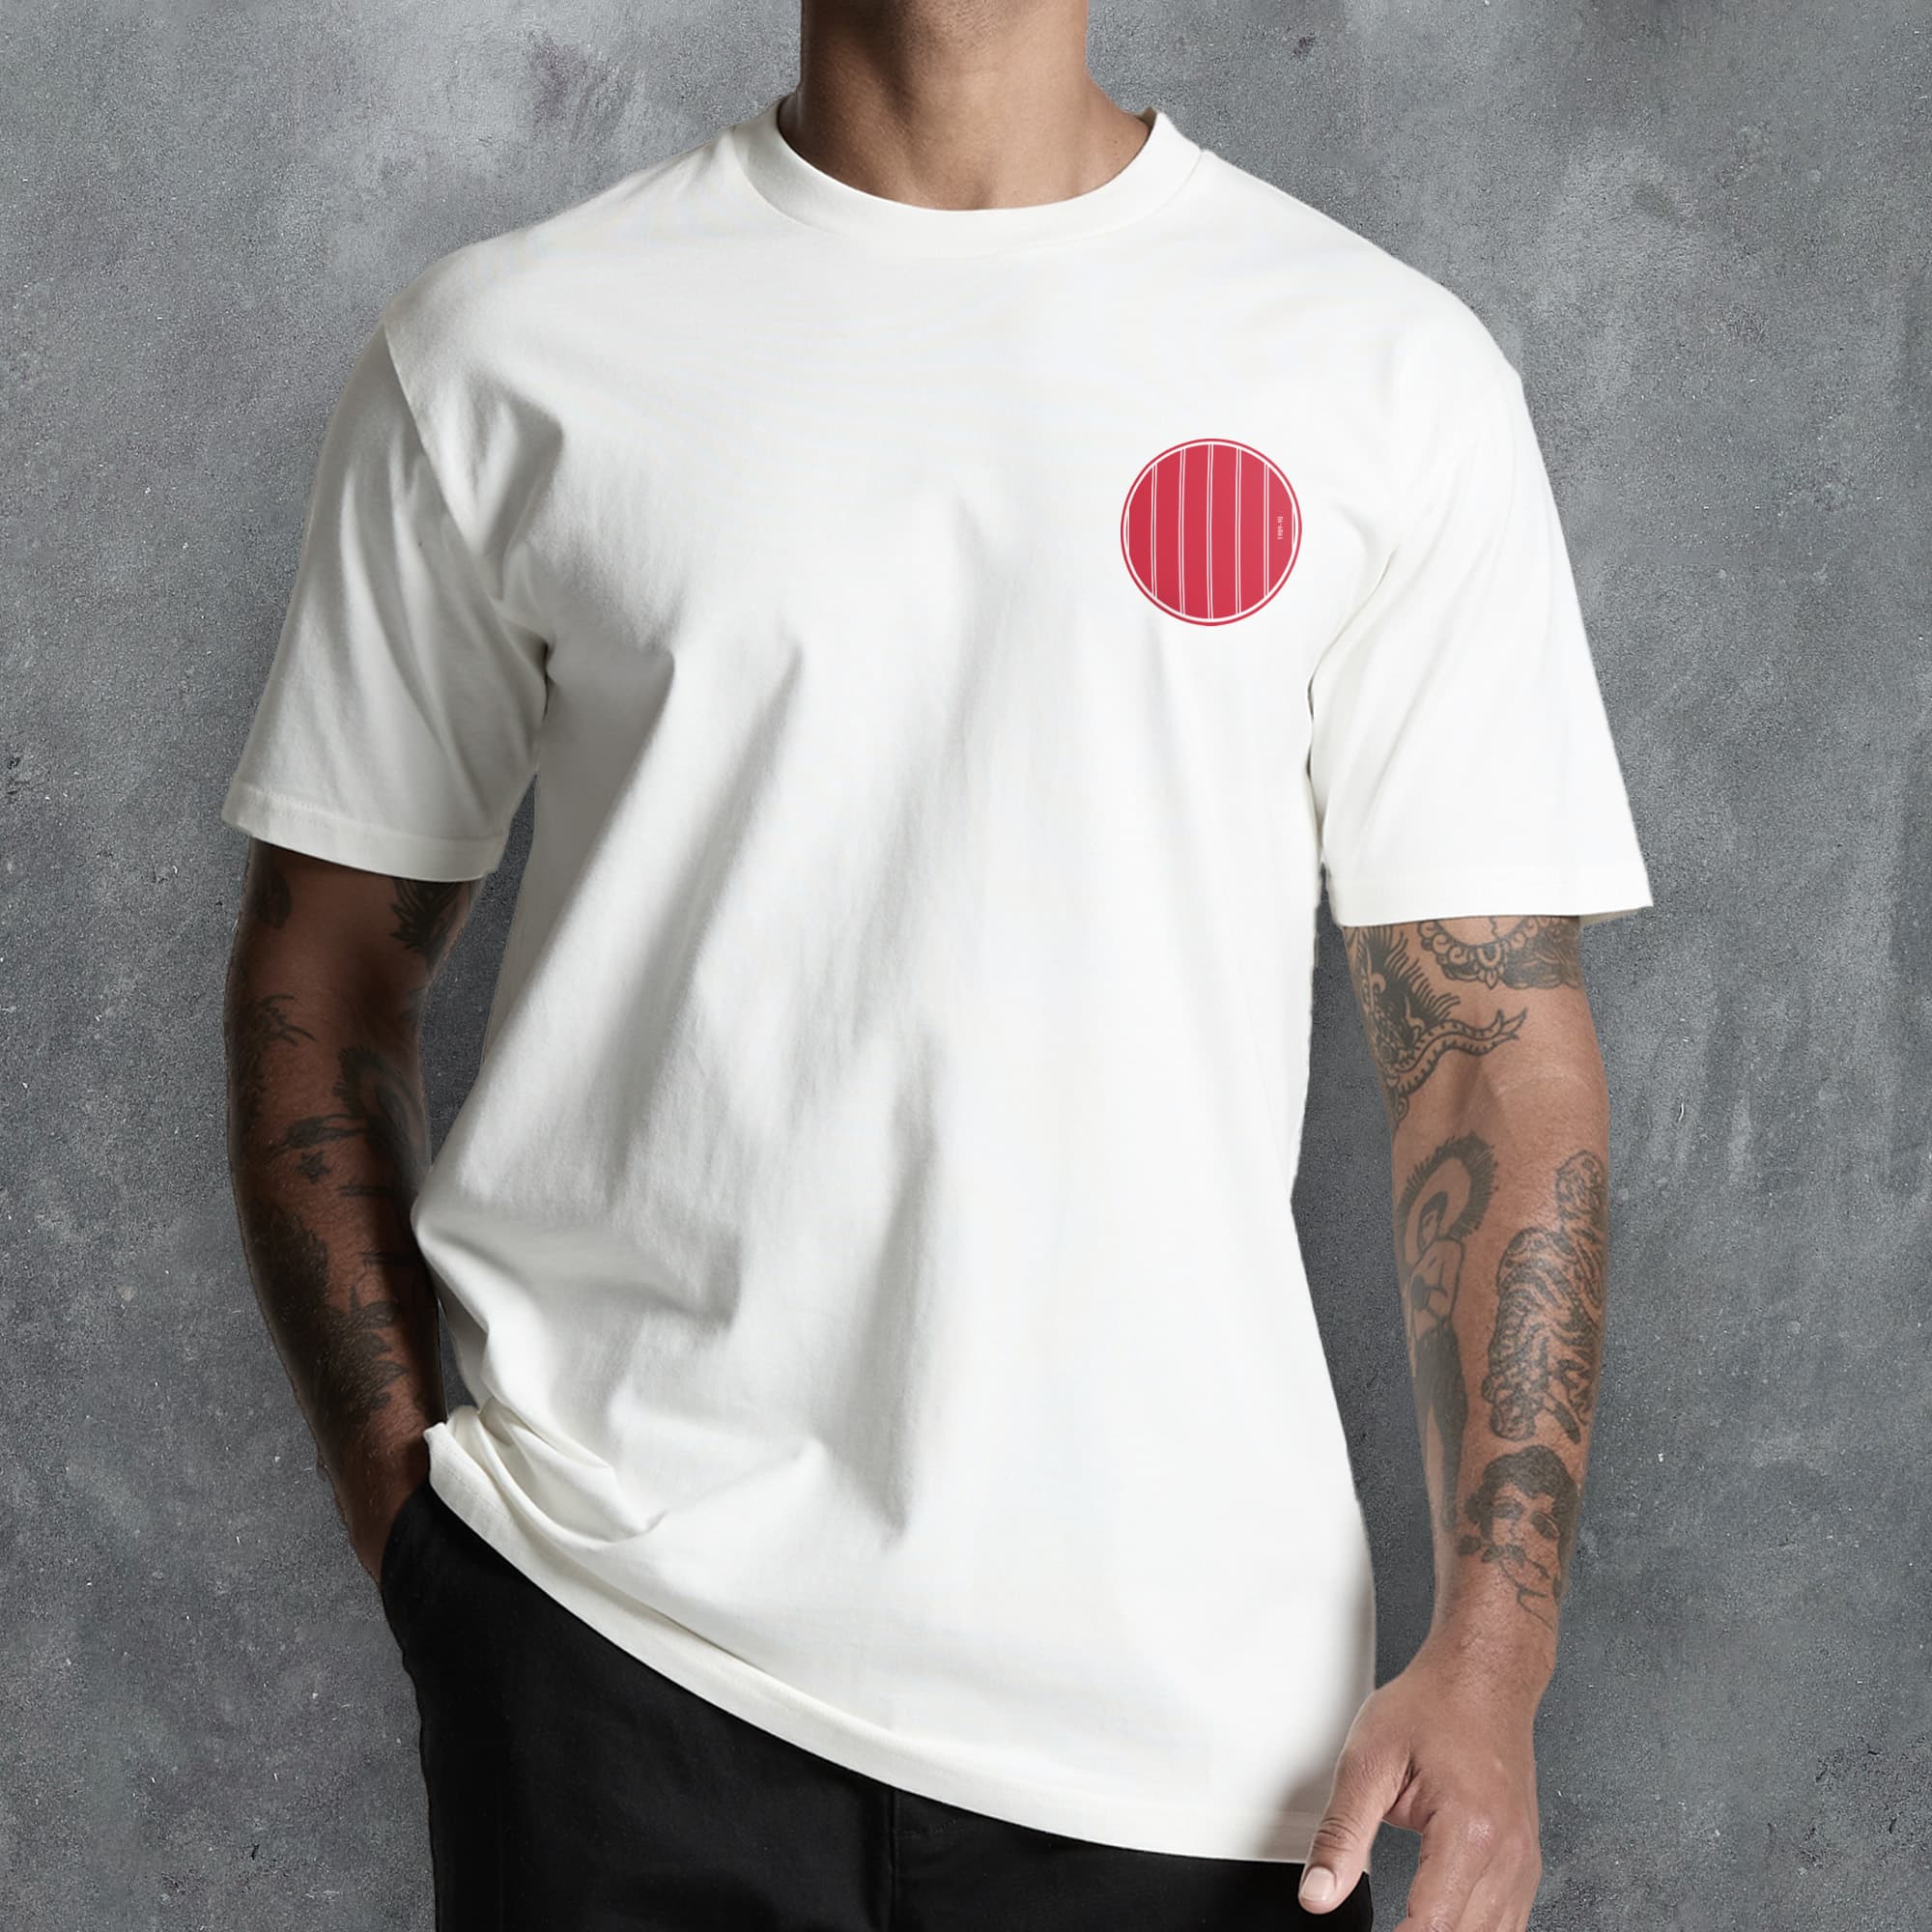 a man wearing a white shirt with a red circle on it